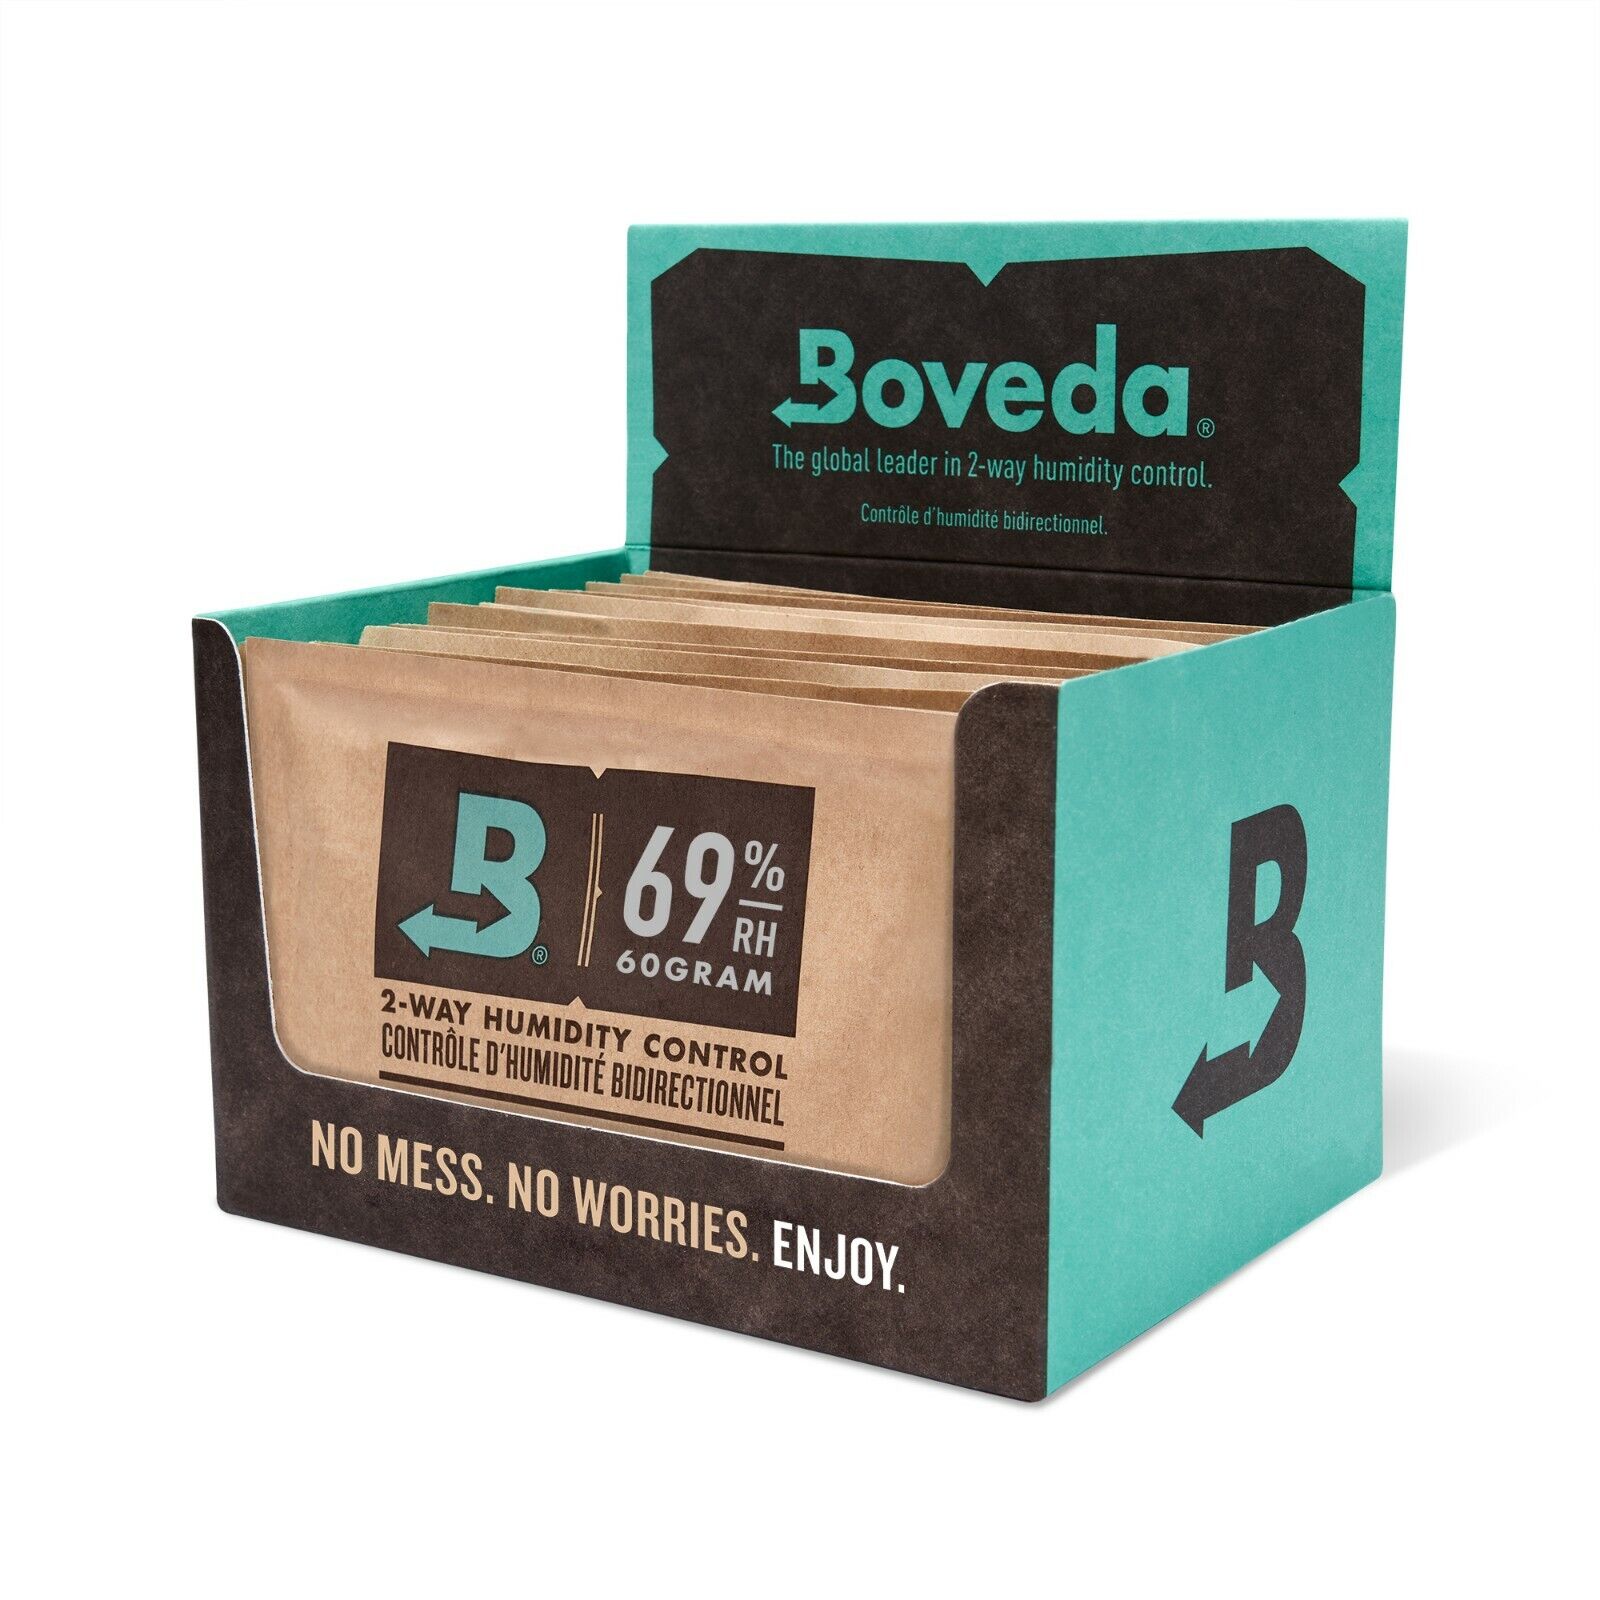 Boveda 69% RH 2-Way Humidity Control - Protects & Restores - Size 60 - 12 Count